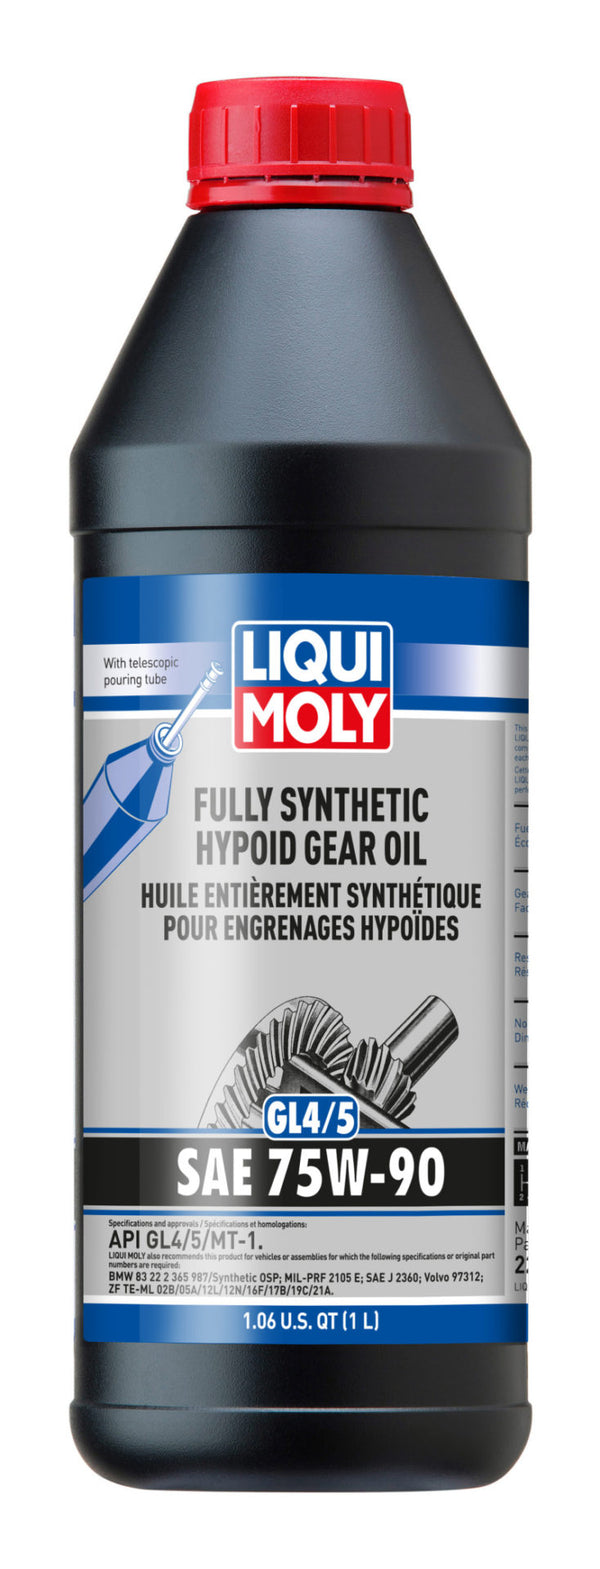 Differential Oil SAE 75W-90 By Liqui Moly 1 Liter 07512293972 Liqui Moly